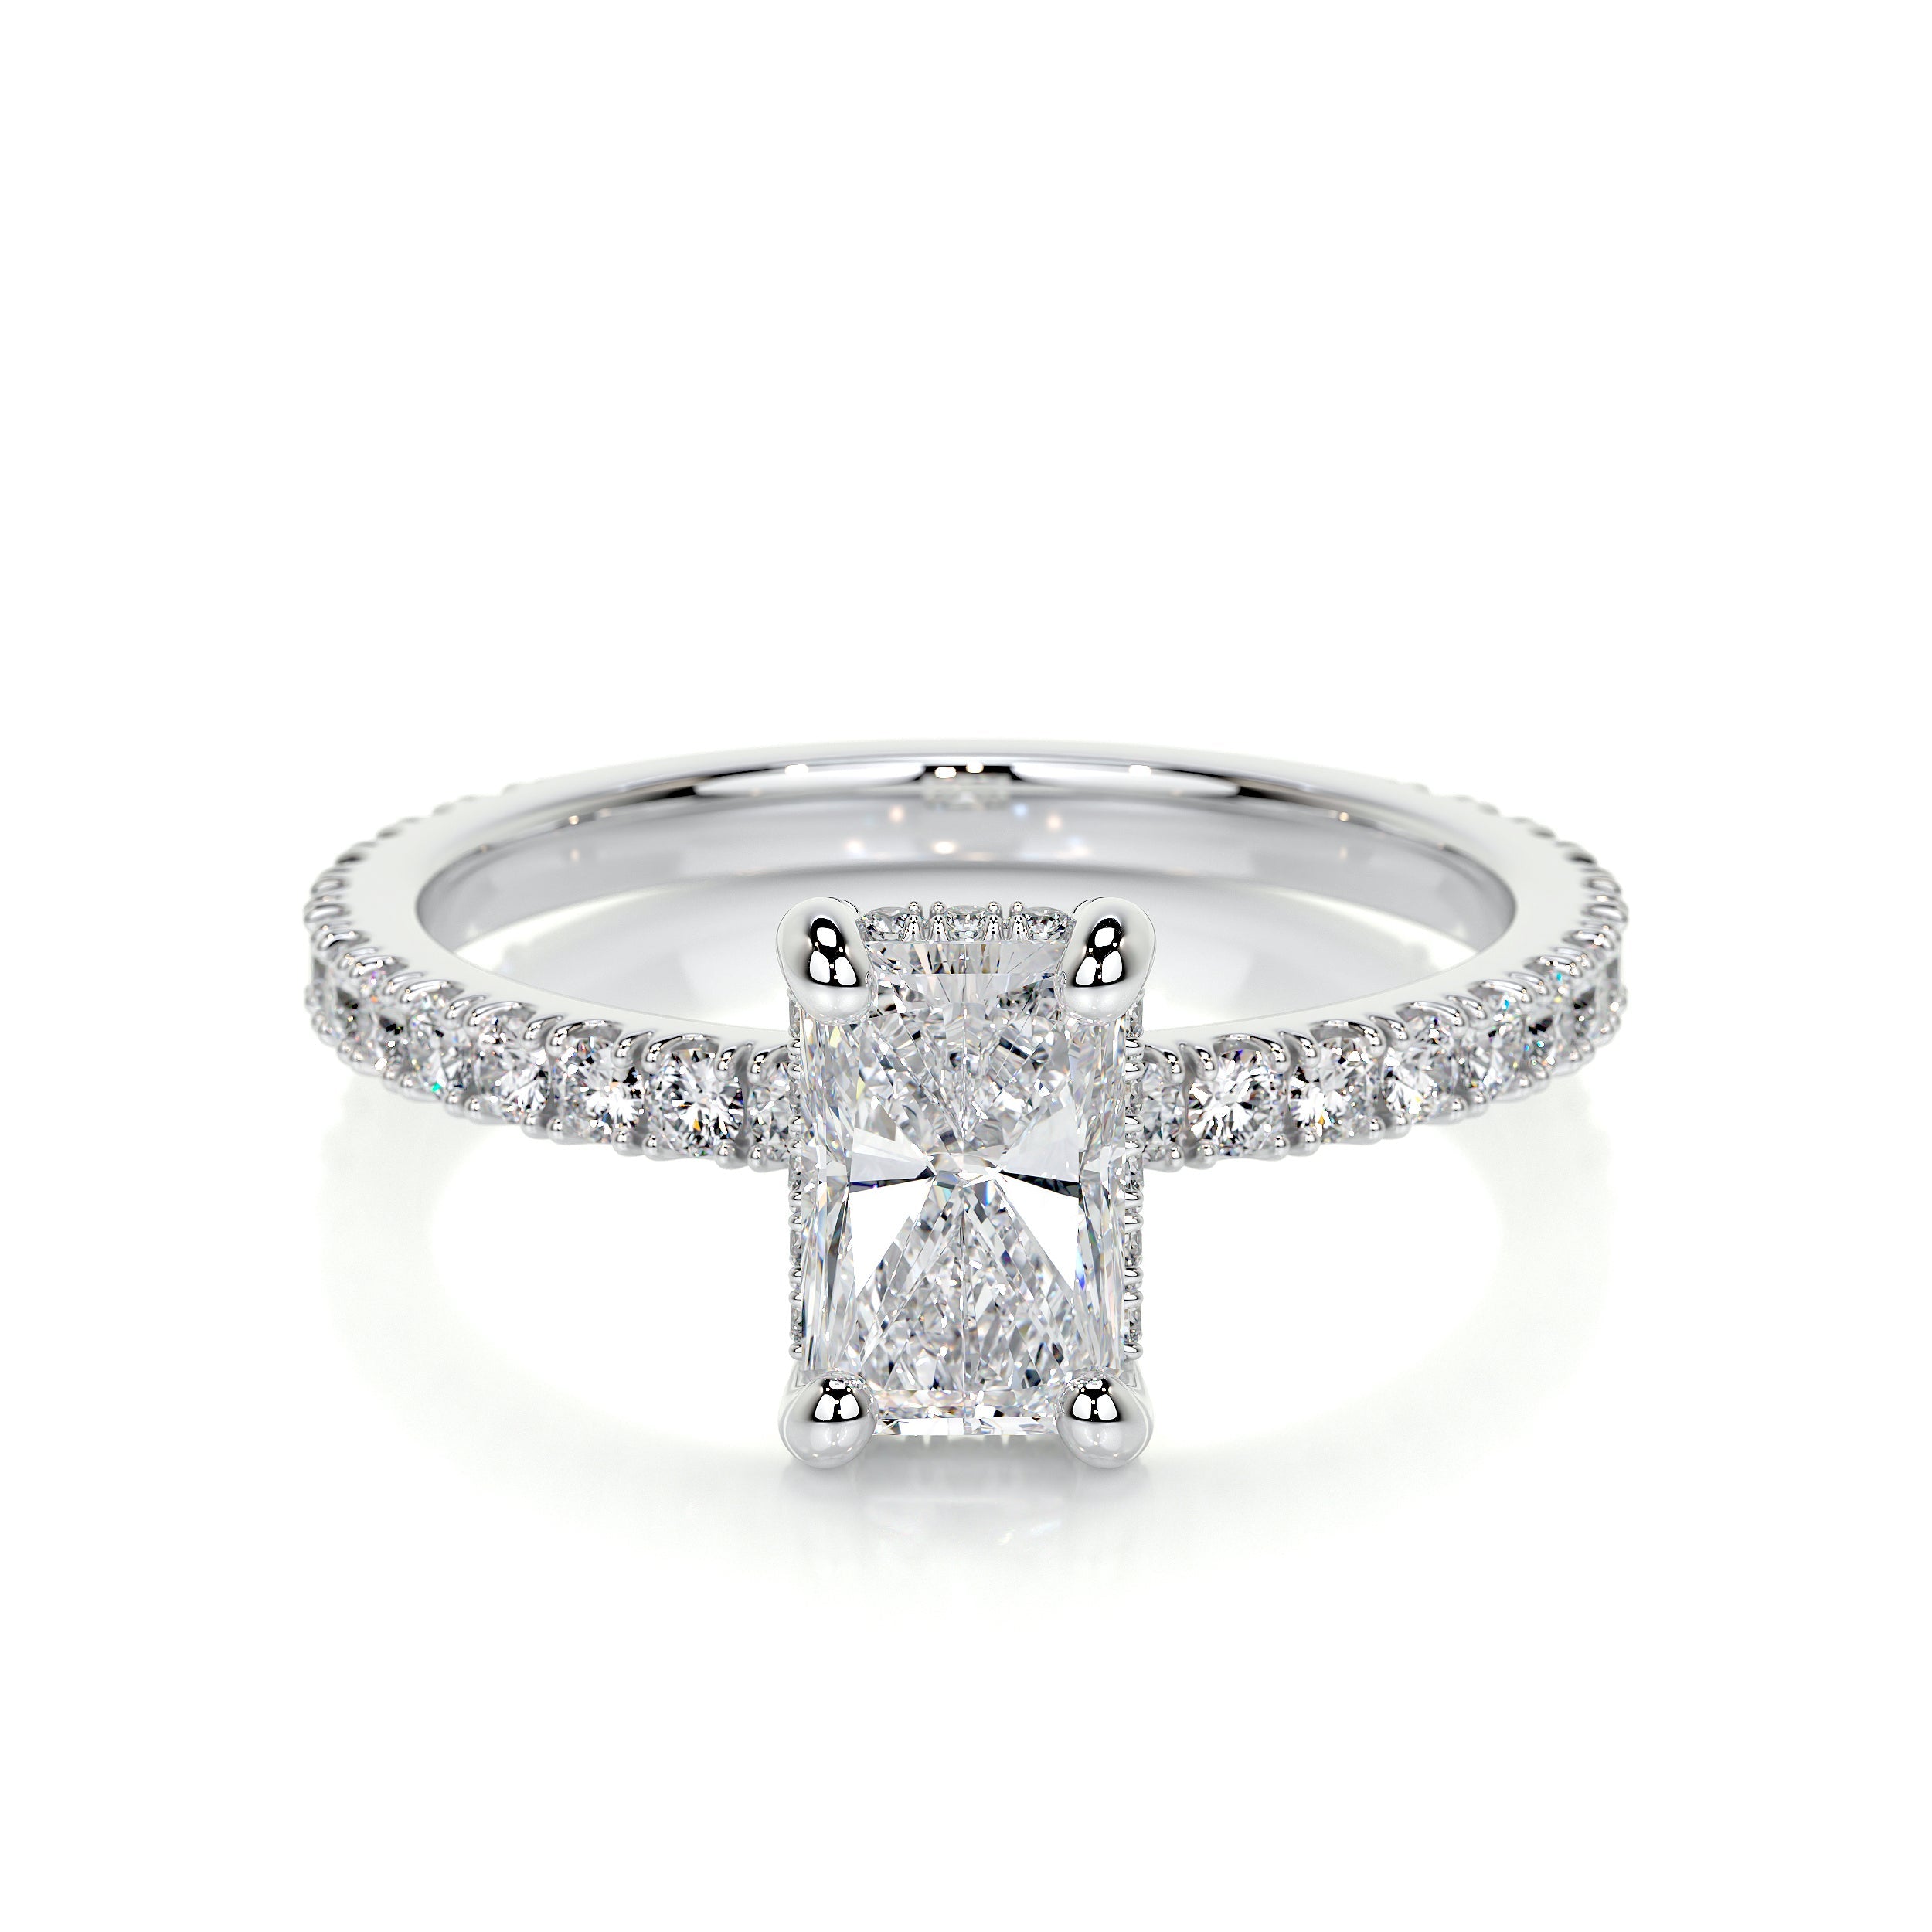 Buying Guide For a 9ct Diamond Ring - Estate Diamond Jewelry